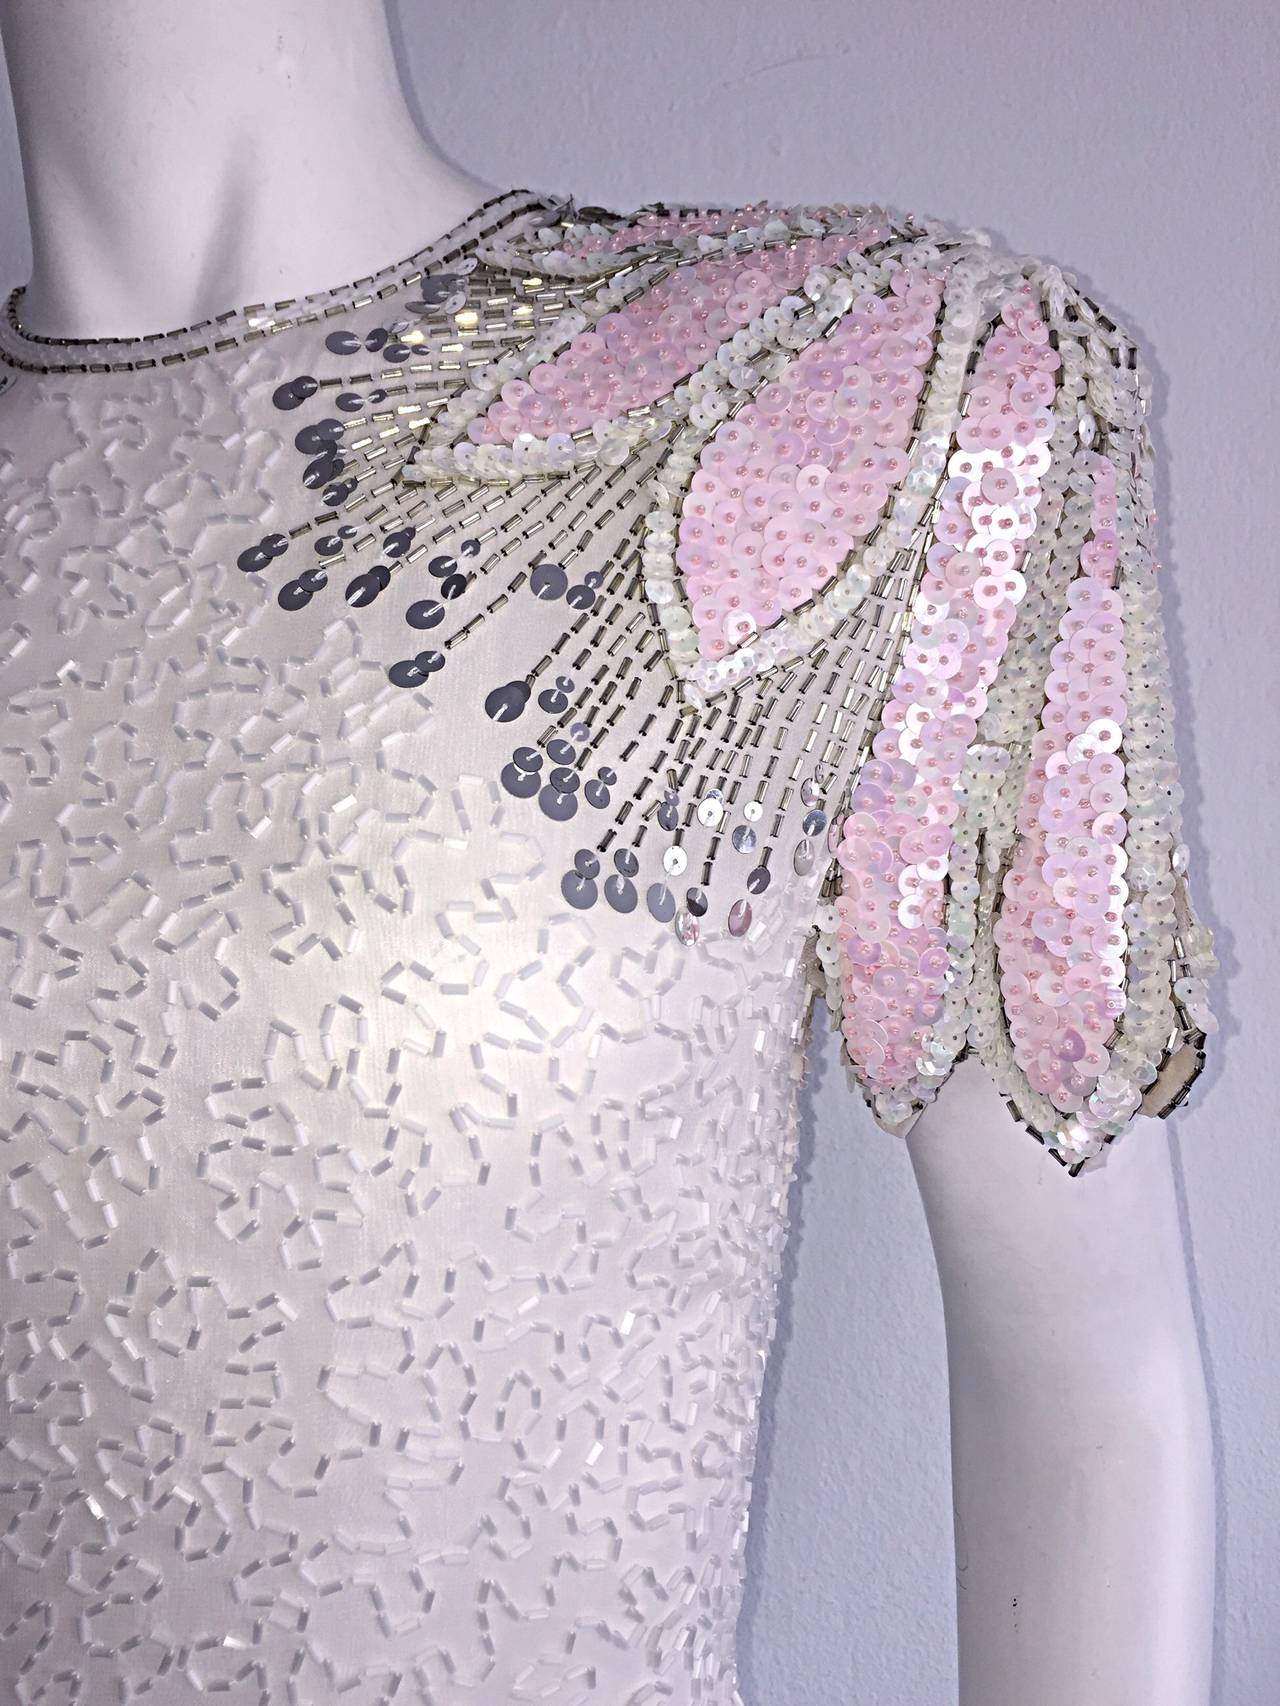 Gray Stunning Vintage White + Pink + Silver Beaded Sequin Illusion Dress w/ Open Back